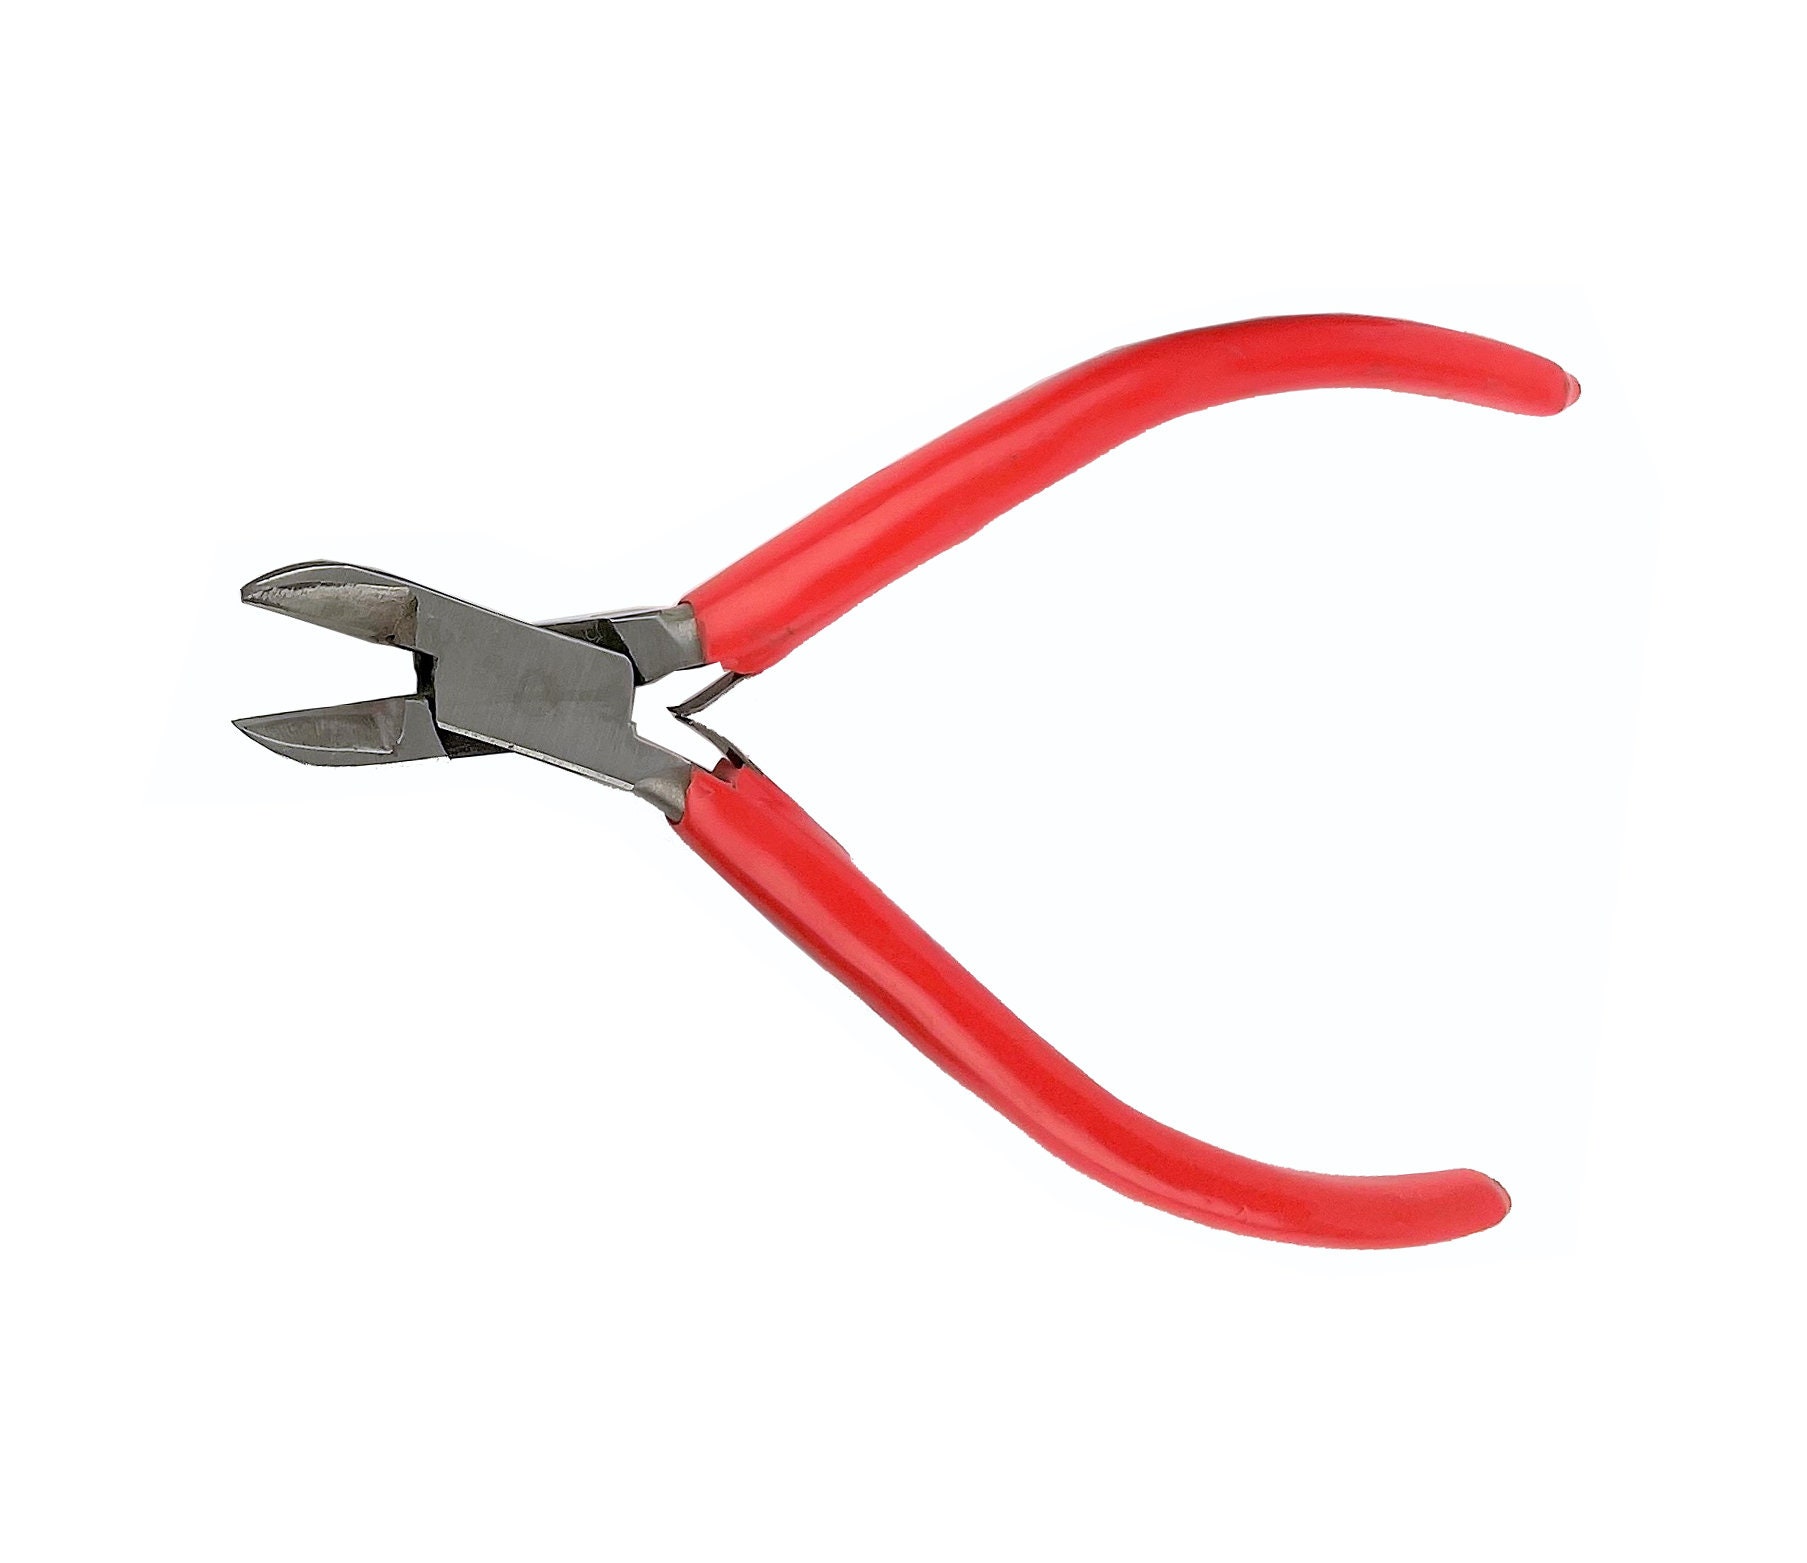 Simply Modern Round Nose Pliers 55240 Fine Tip Pliers, Box Joint Pliers,  Roundnose Pliers, Wire Wrapping Pliers, Jewelers Pliers 